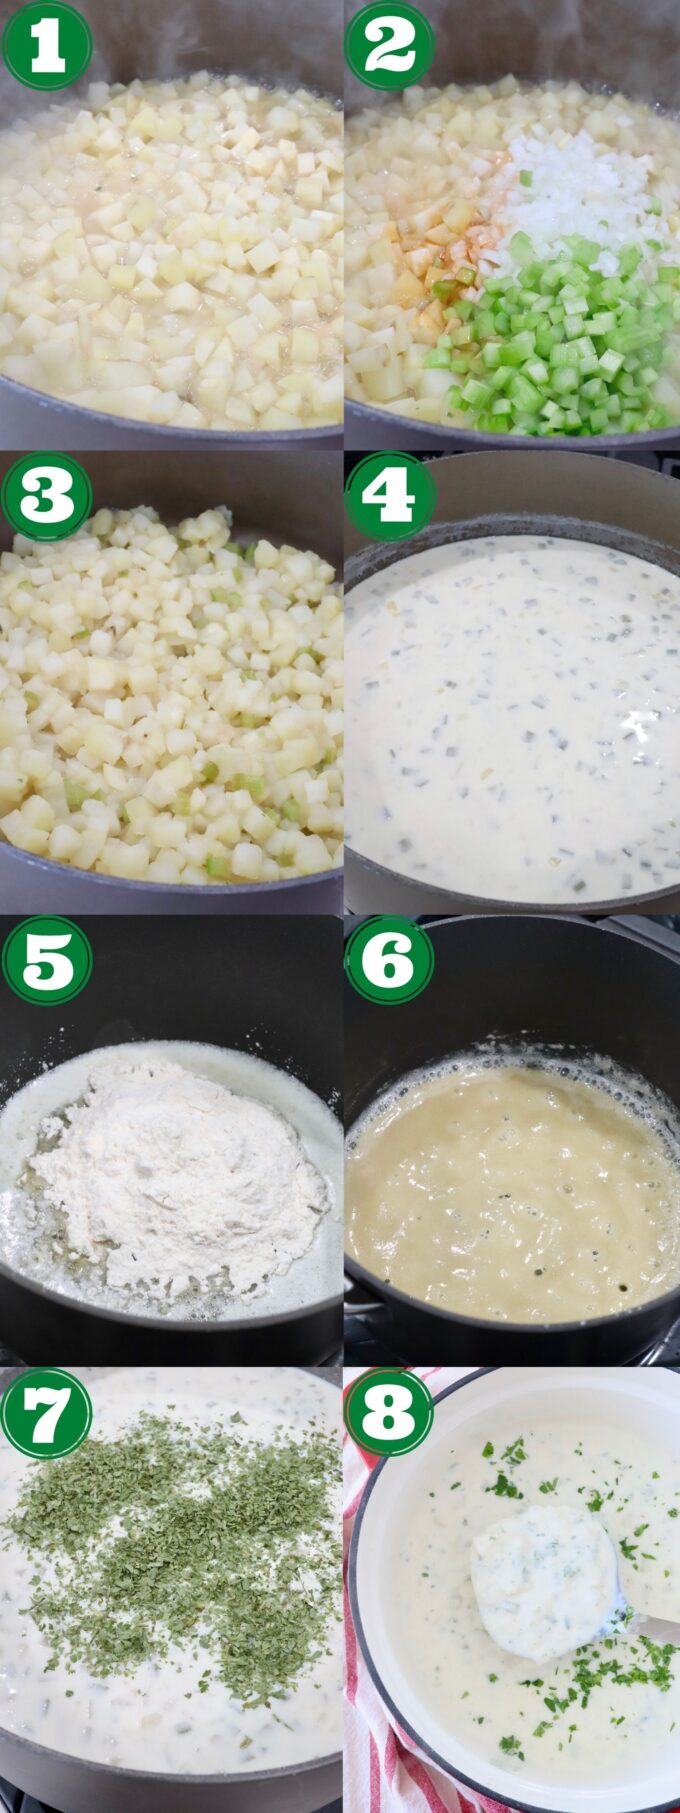 collage of images showing how to make potato soup